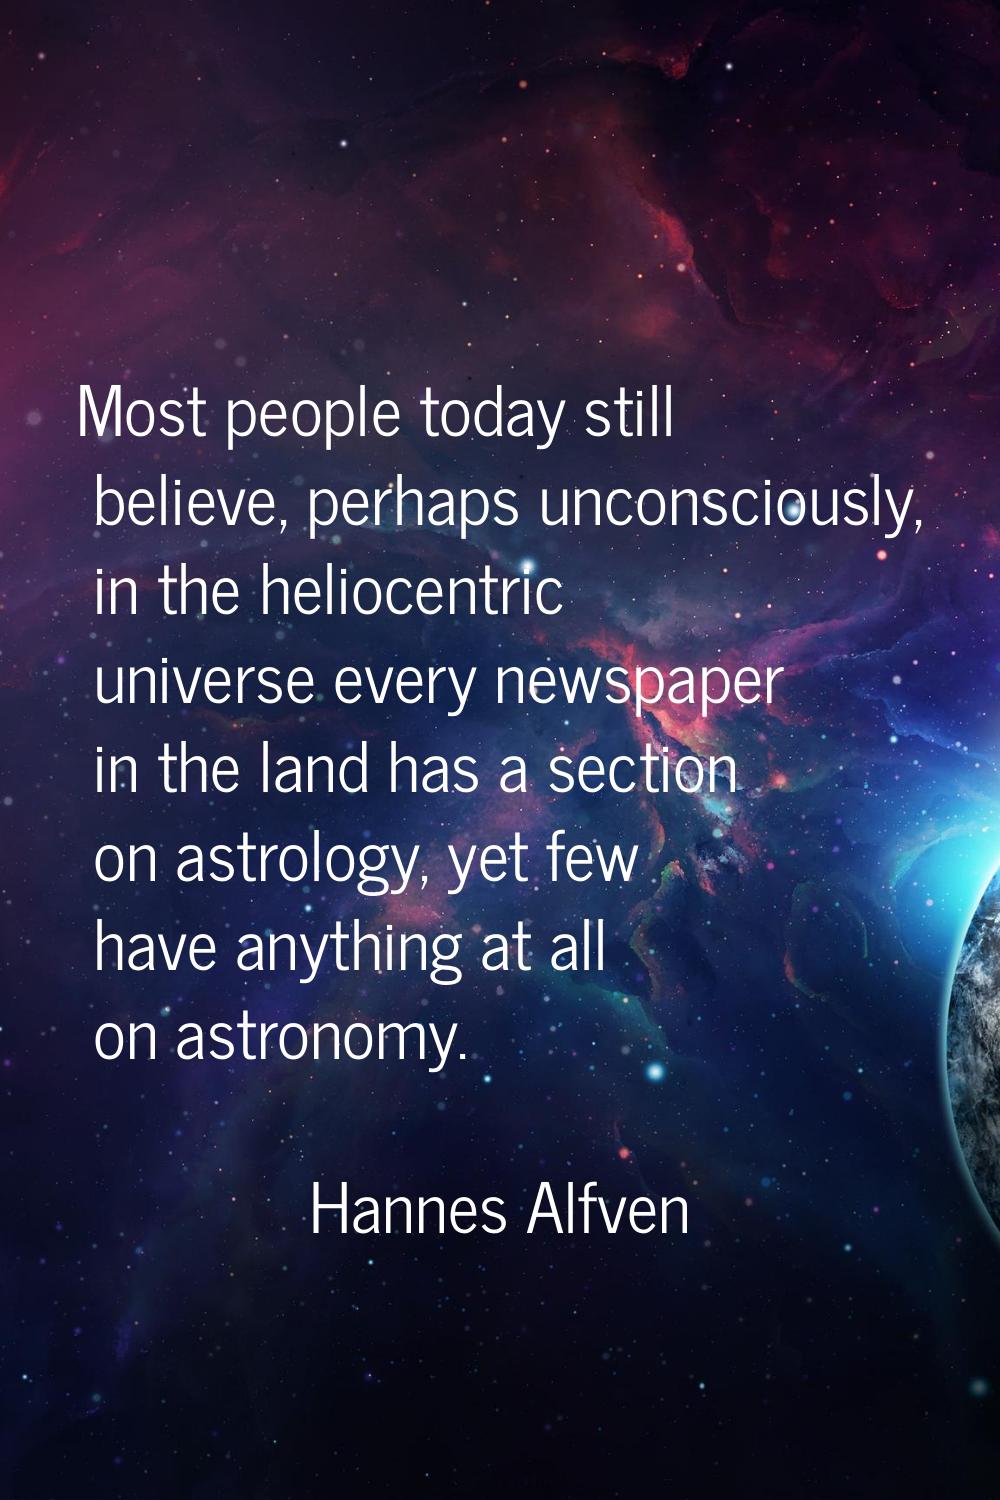 Most people today still believe, perhaps unconsciously, in the heliocentric universe every newspape